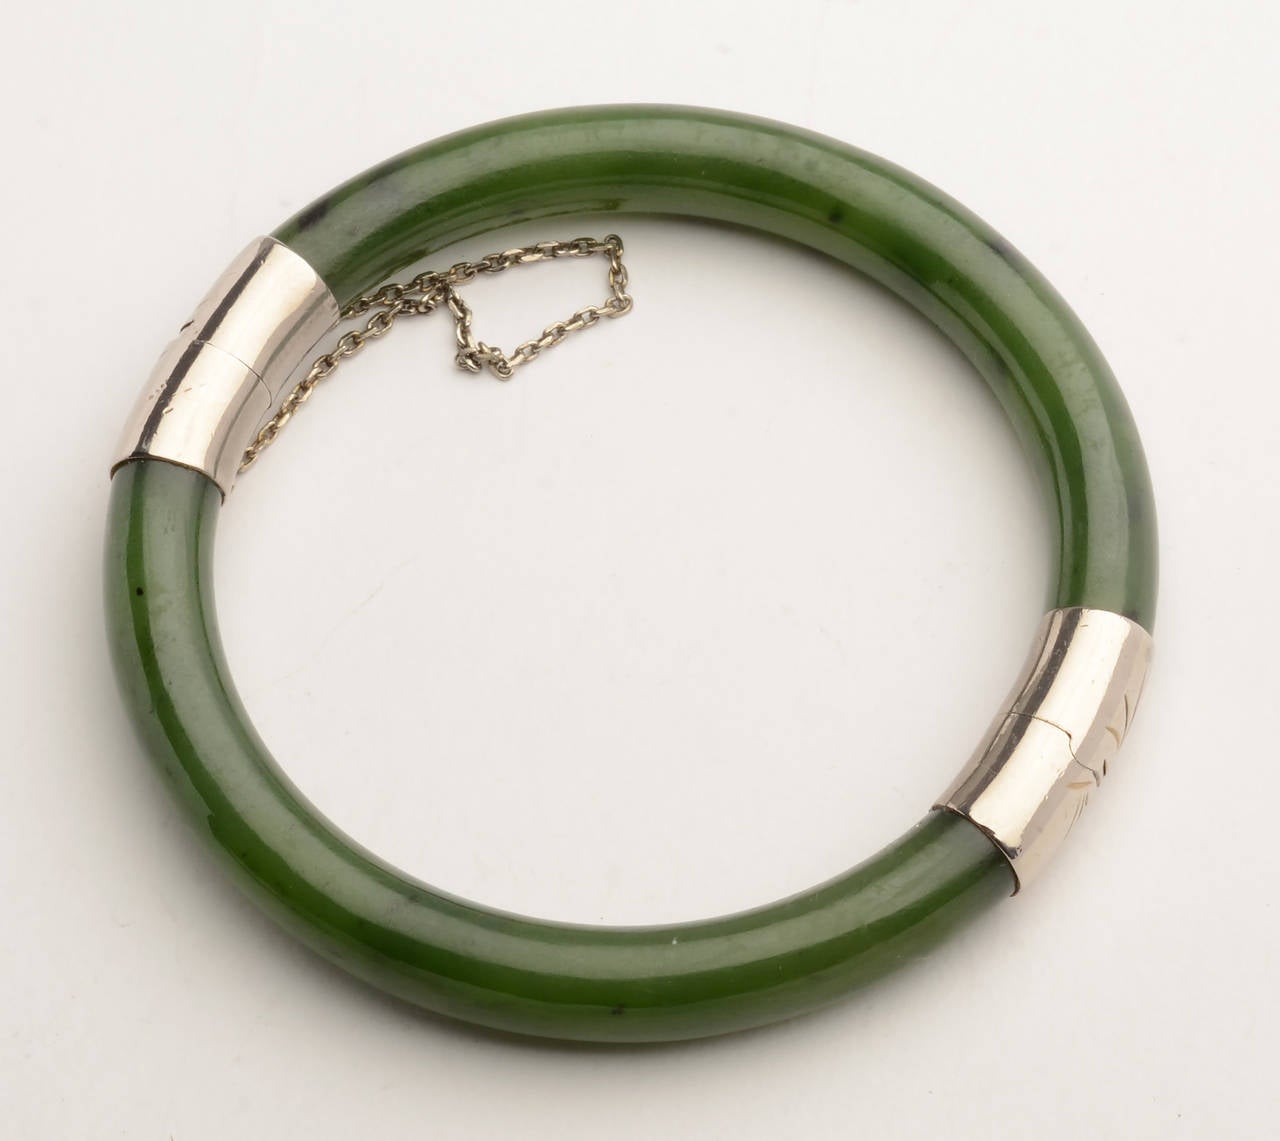 Richly colored nephrite bangle bracelet with two sterling silver ornaments. Both are incised with stylized leaf motifs. The interior diameter is 2 3/16